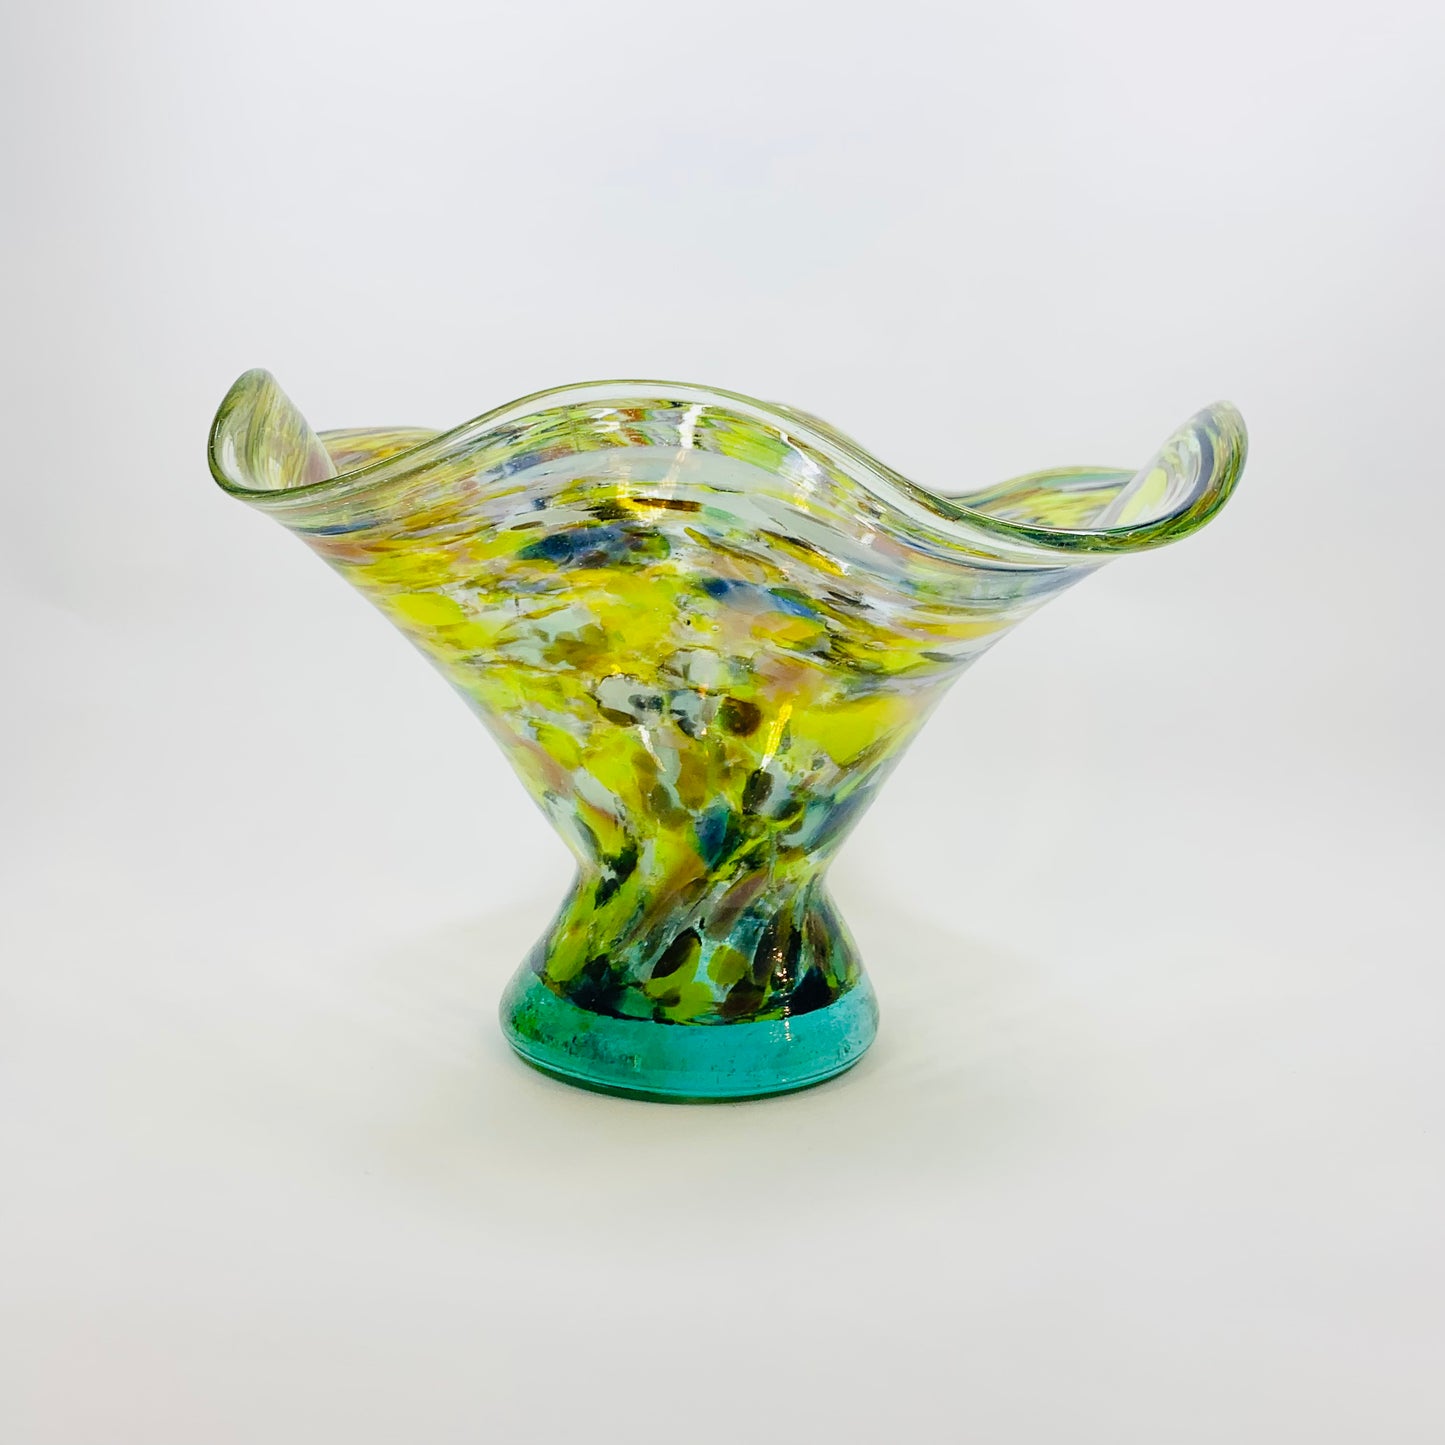 1980s Spanish recycled speckled harlequin glass handkerchief bowl